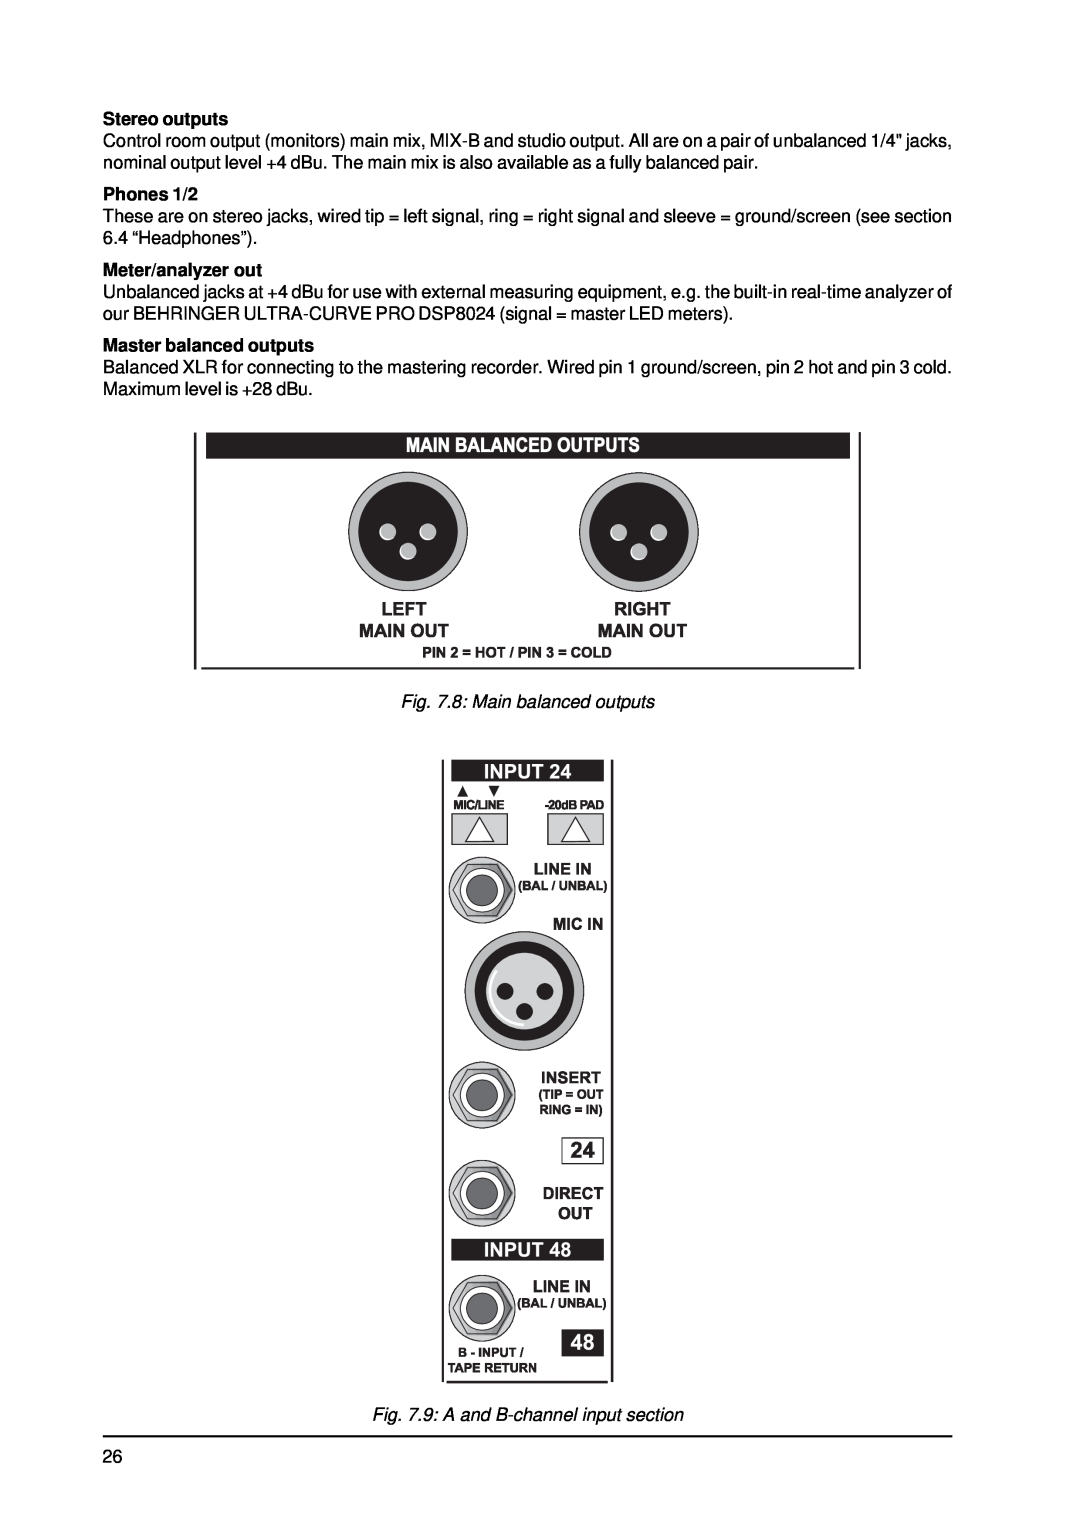 Behringer MX9000 user manual Stereo outputs, Phones 1/2, Meter/analyzer out, Master balanced outputs 